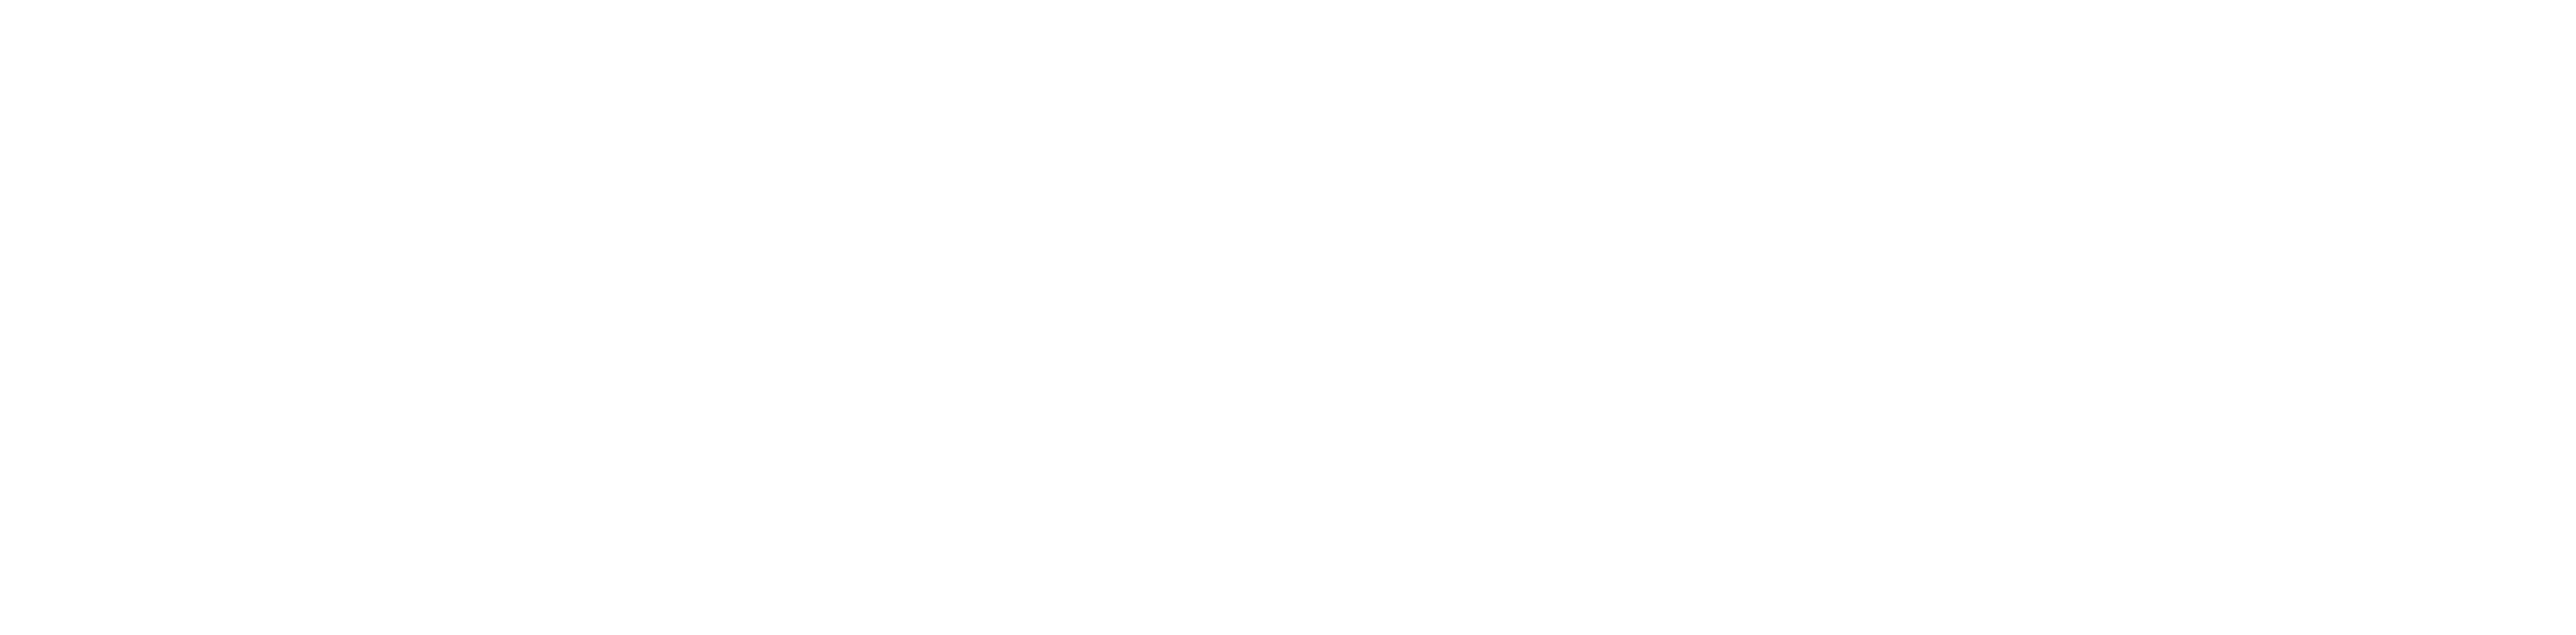 The Fulshear Wealth Management Group